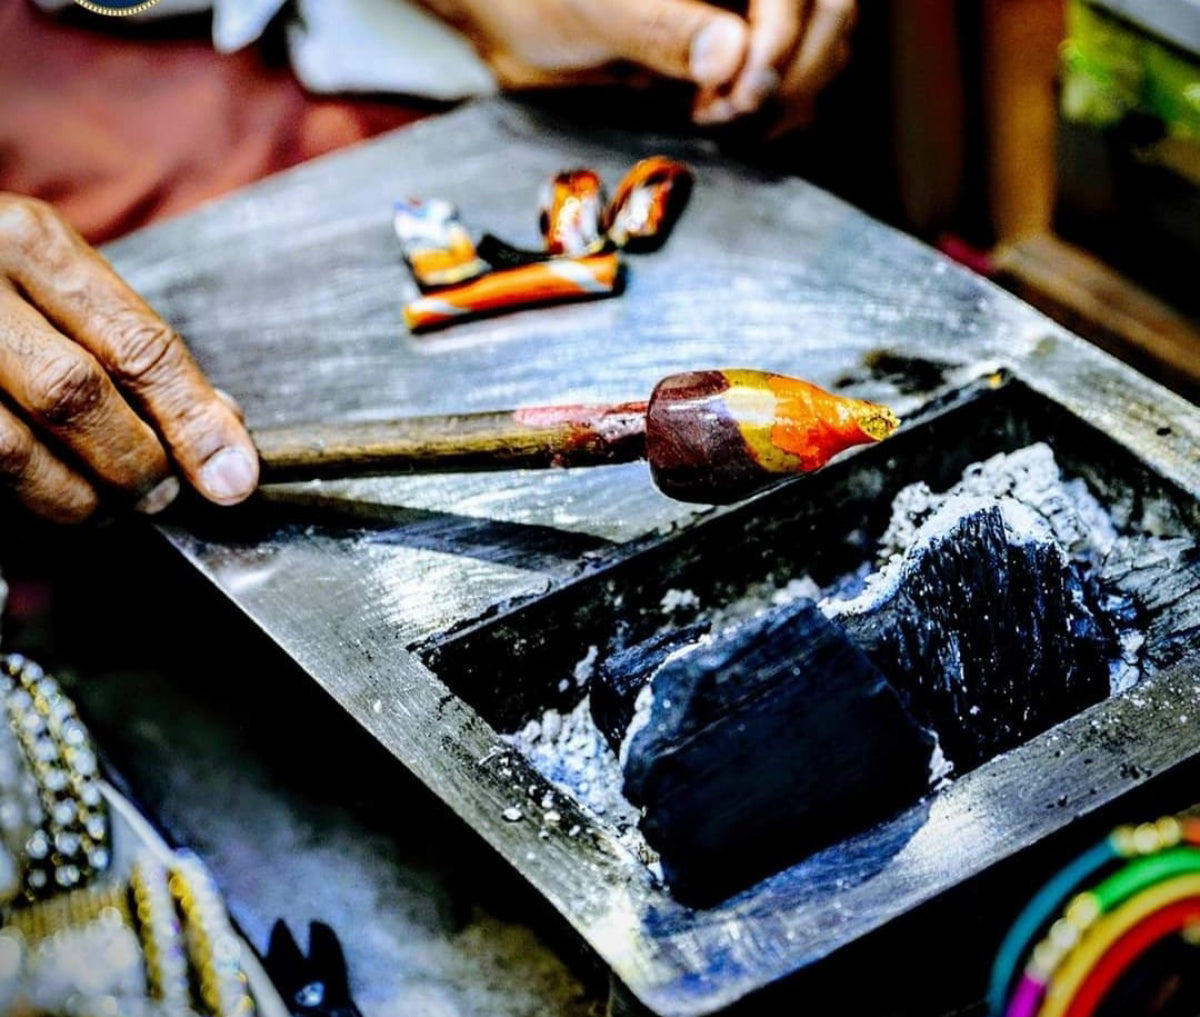 The livelihood of artisans across India is being threatened by low demand, limited market opportunities, and middlemen's exploitation. gaonkasaman